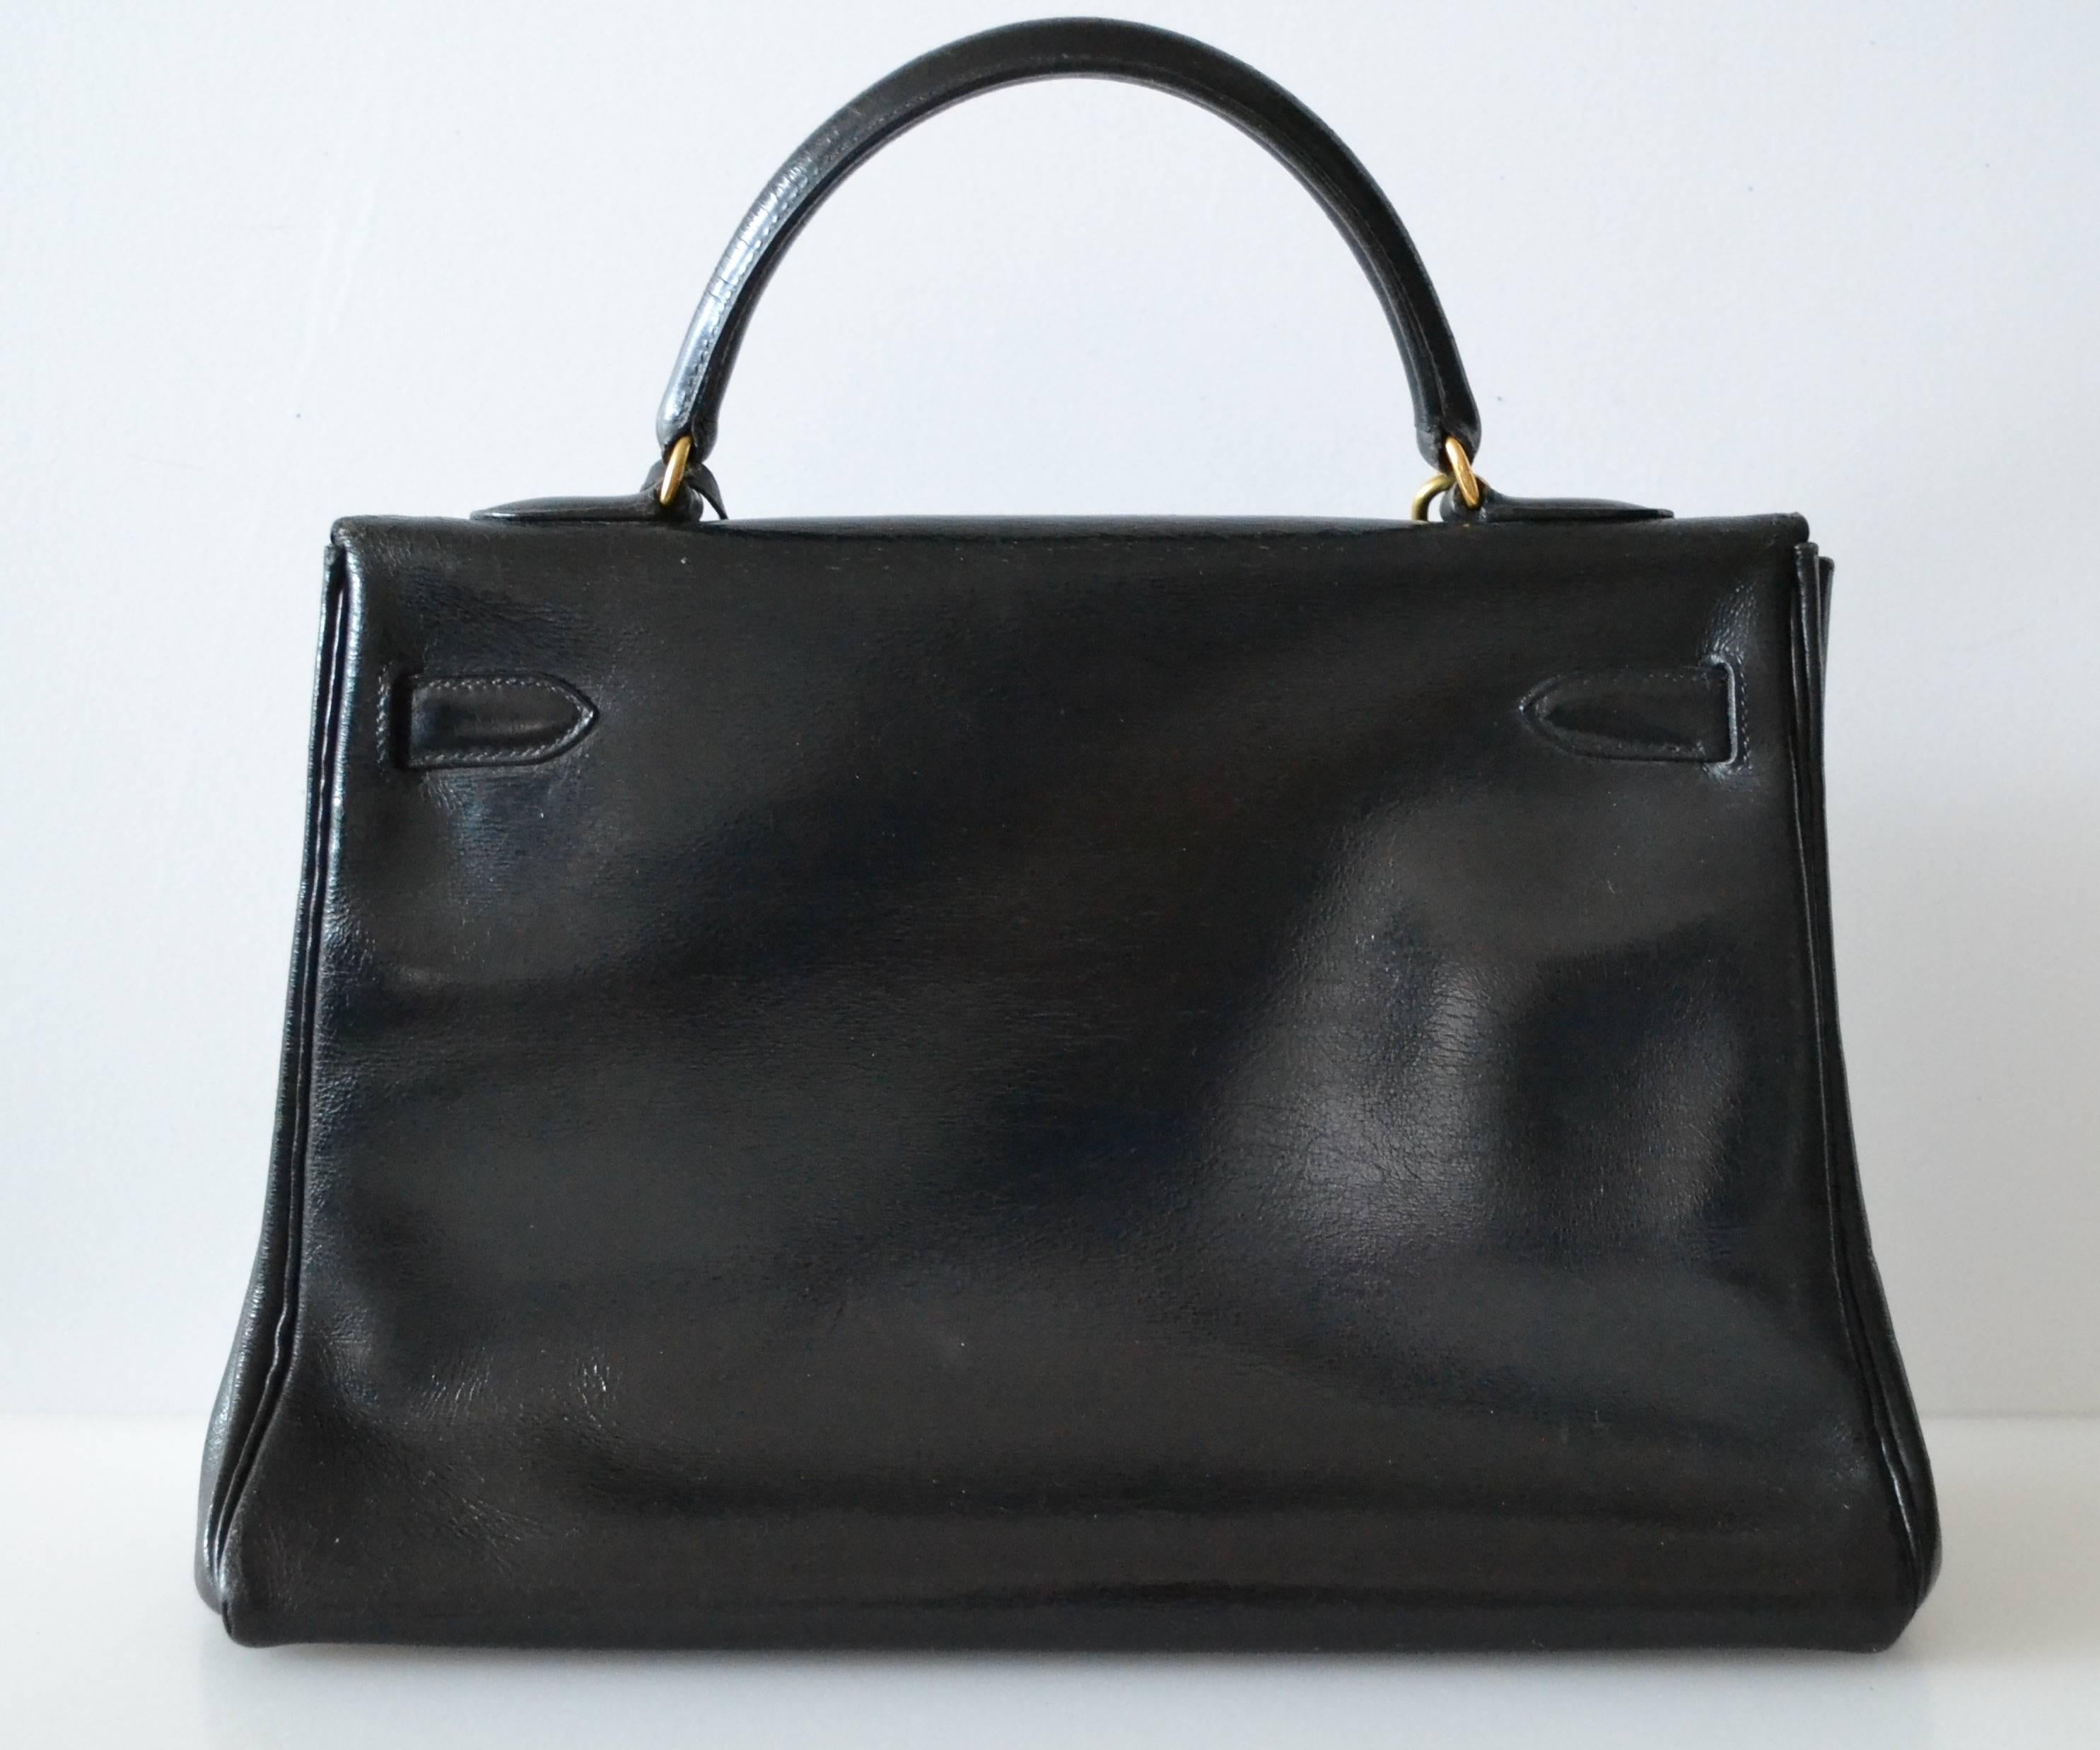 Hermes Kelly 32 Black Box
 
Black box leather with gold hardware
Retourne modèle
 
The bag is lined with chevre leather. Interior is in good condition with a pocket.
This bag is in good condition.
It is a vintage bag from 60s. Normal use. The Box